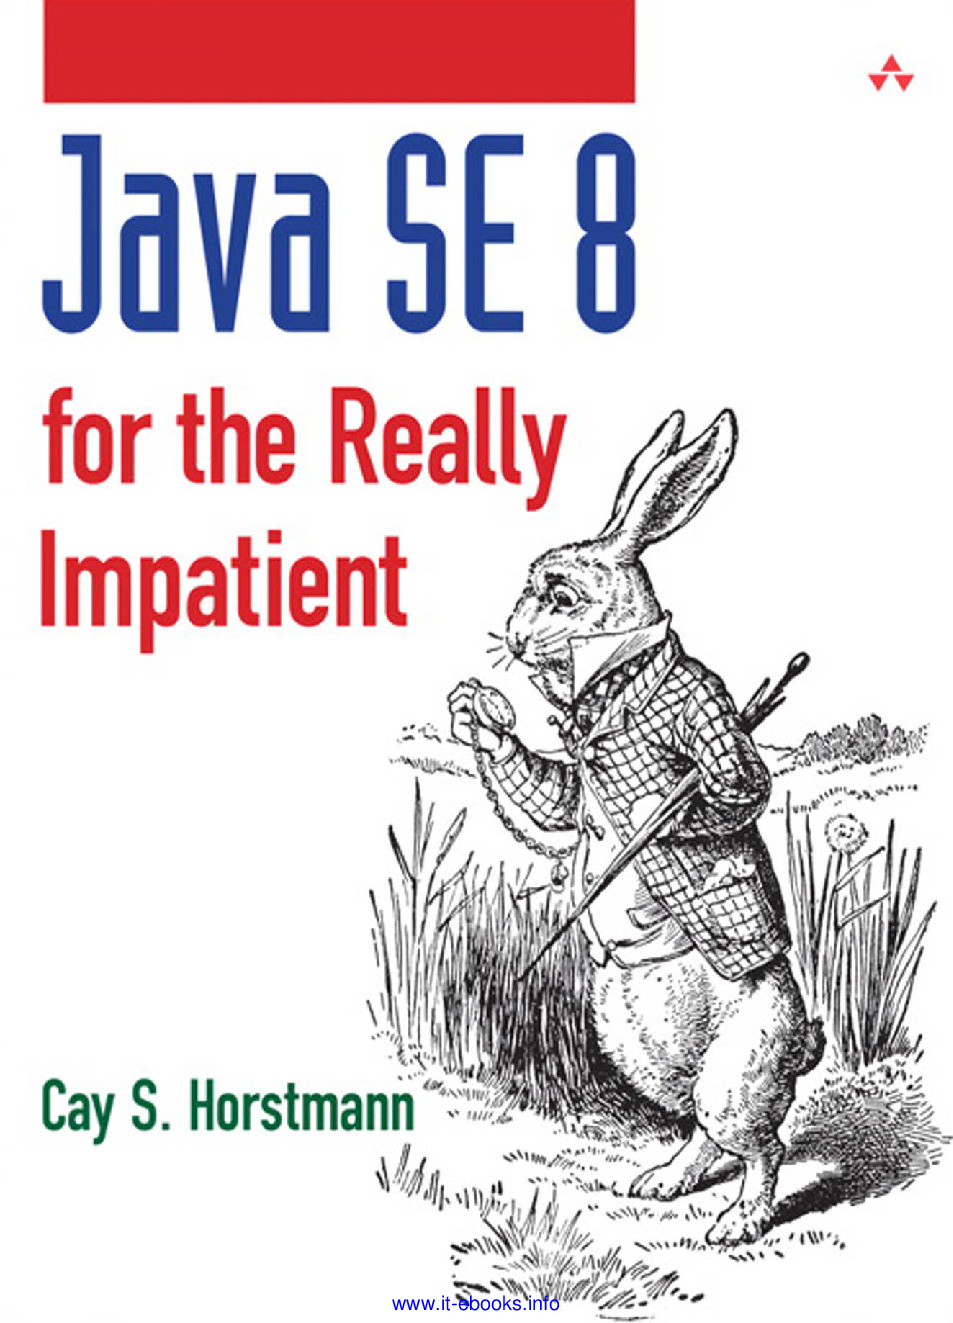 [JAVA][Java SE 8 for the Really Impatient]